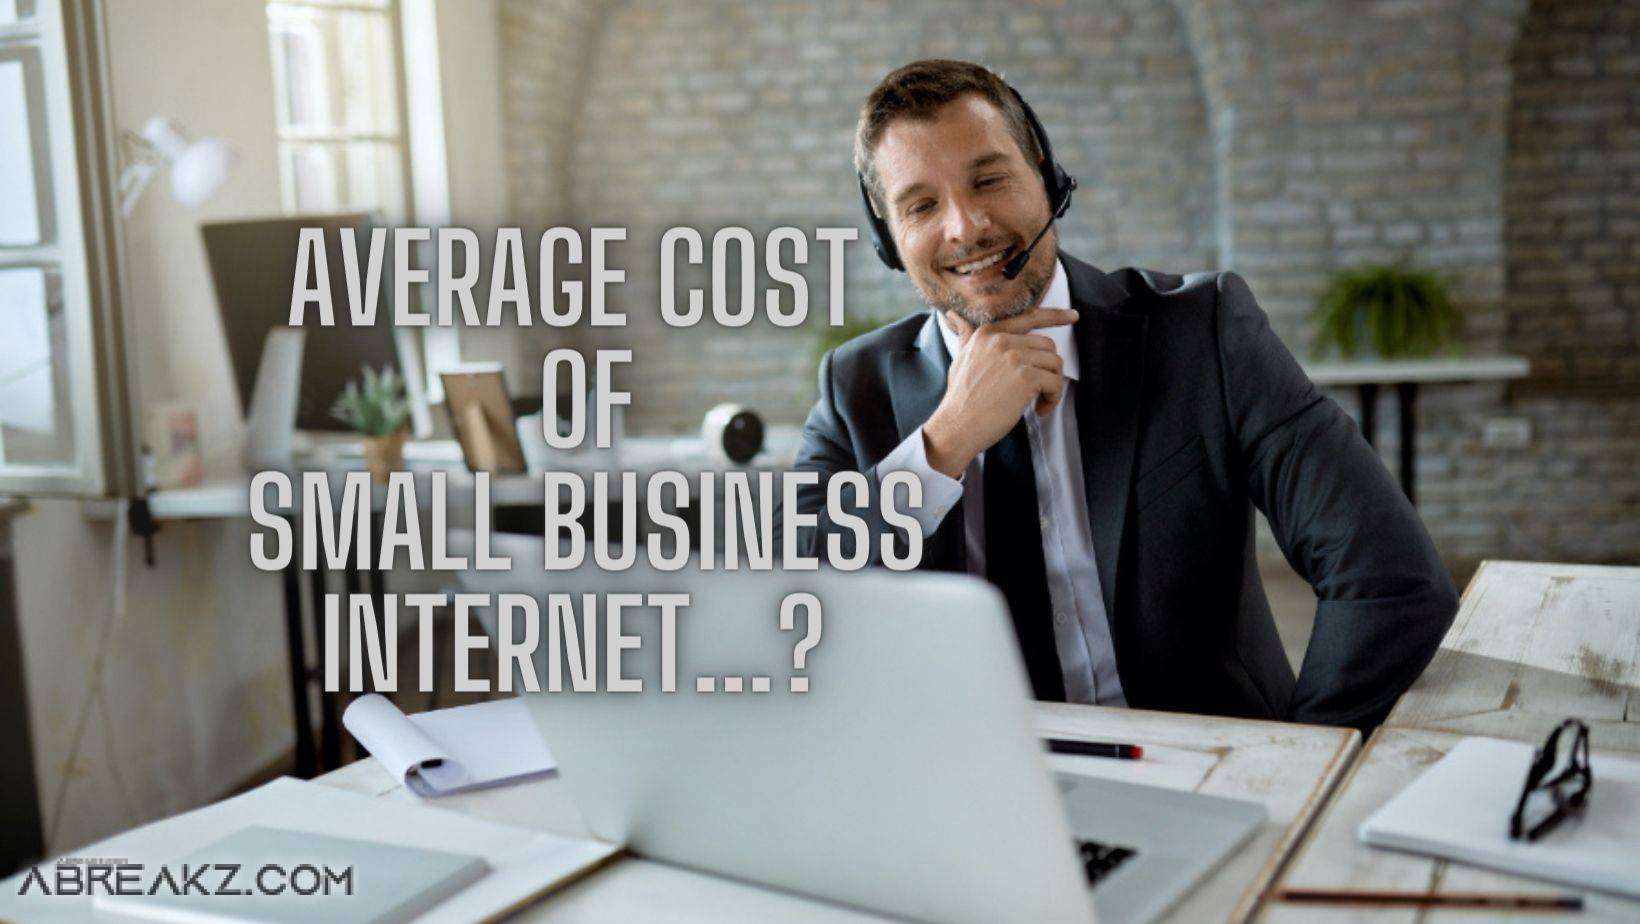 What Is the Average Cost of Small Business Internet?